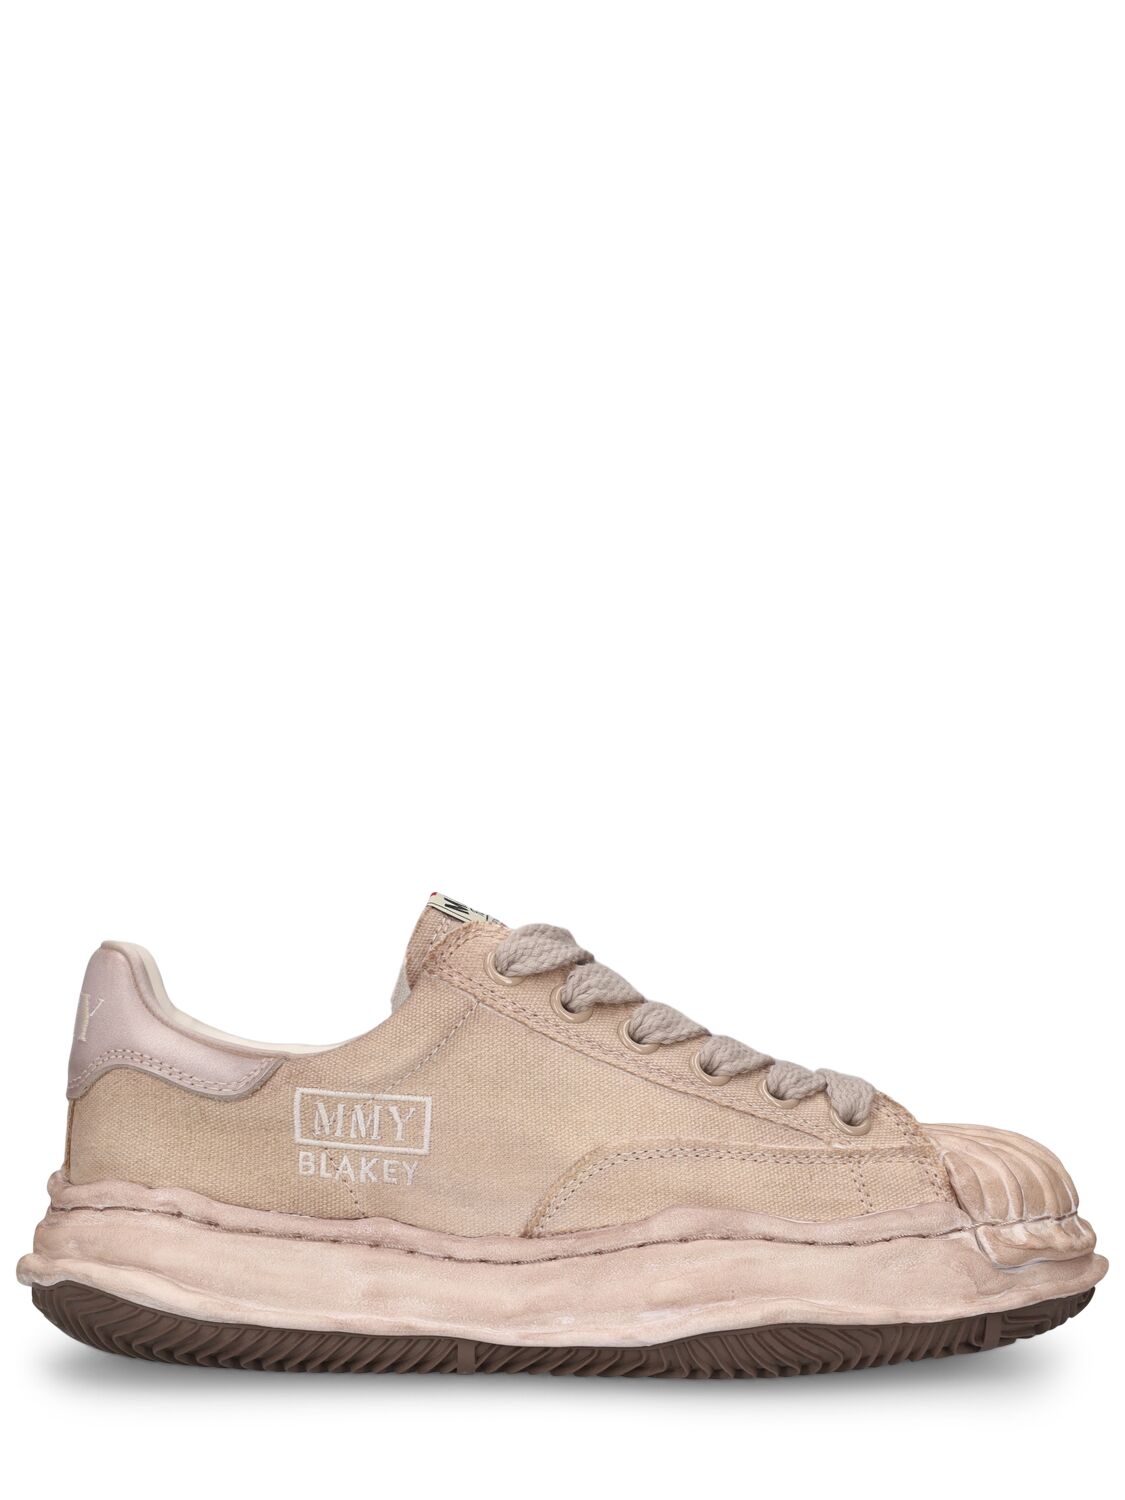 Image of Blakey Low Og Sole Canvas Sneakers